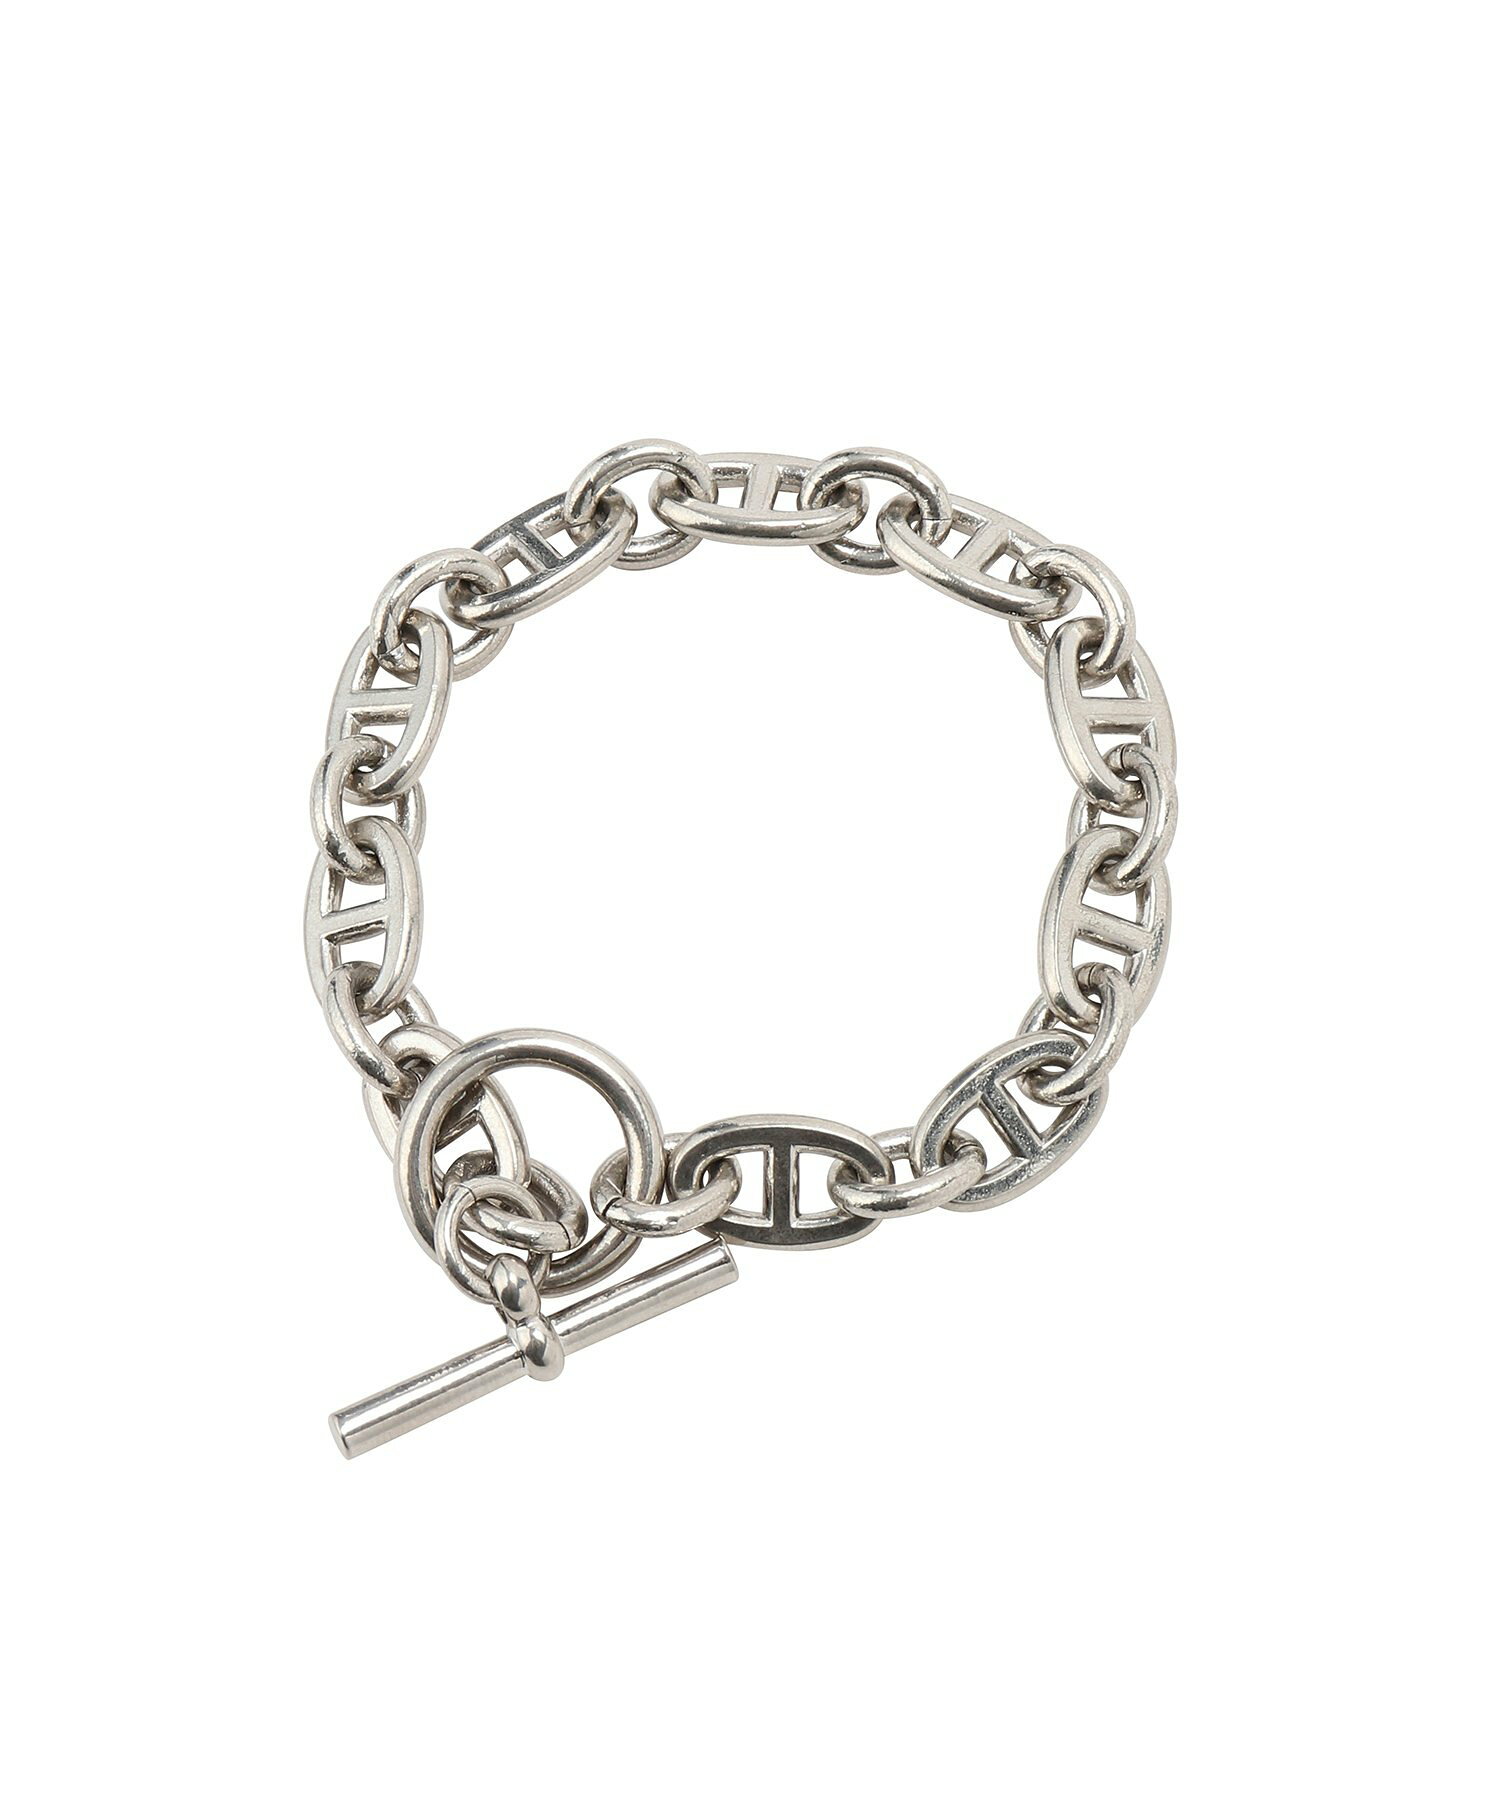 ital. from JUNRed / anchor chain bracelet